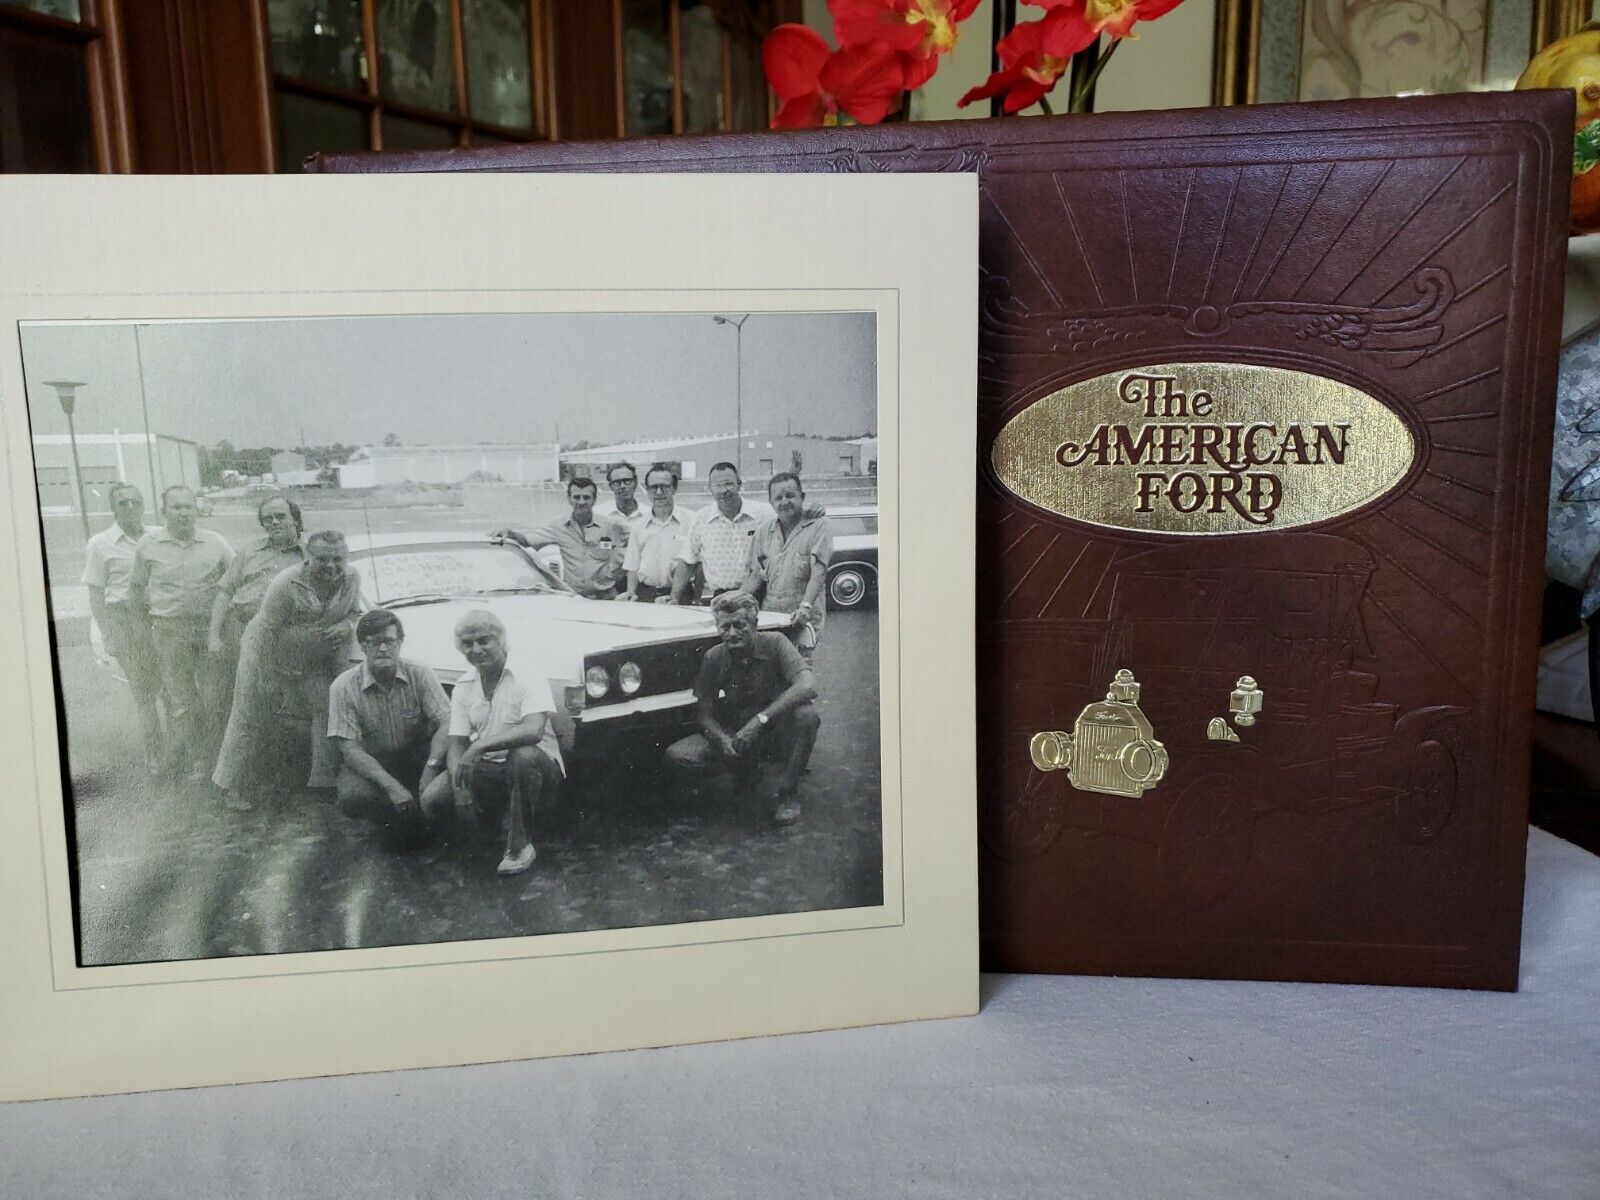 The American Ford Fordiana Series First Ed. Book with Employee Photograph